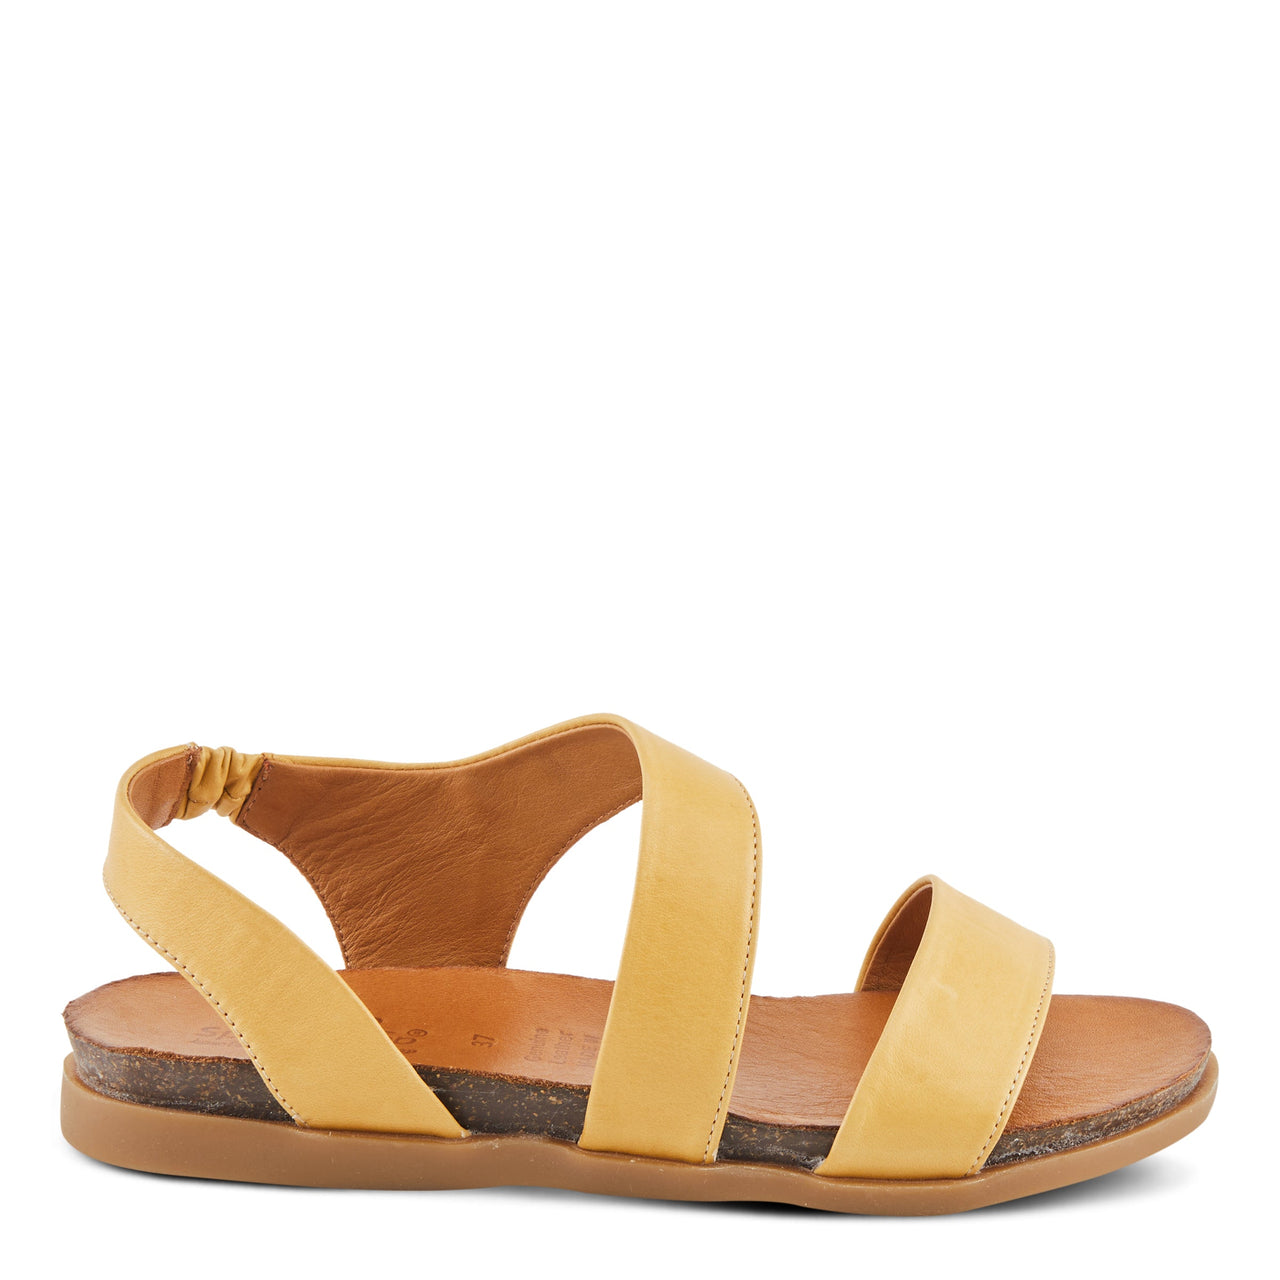 Comfortable and stylish Spring Step Besitos Sandals in brown leather with adjustable straps and cushioned footbed